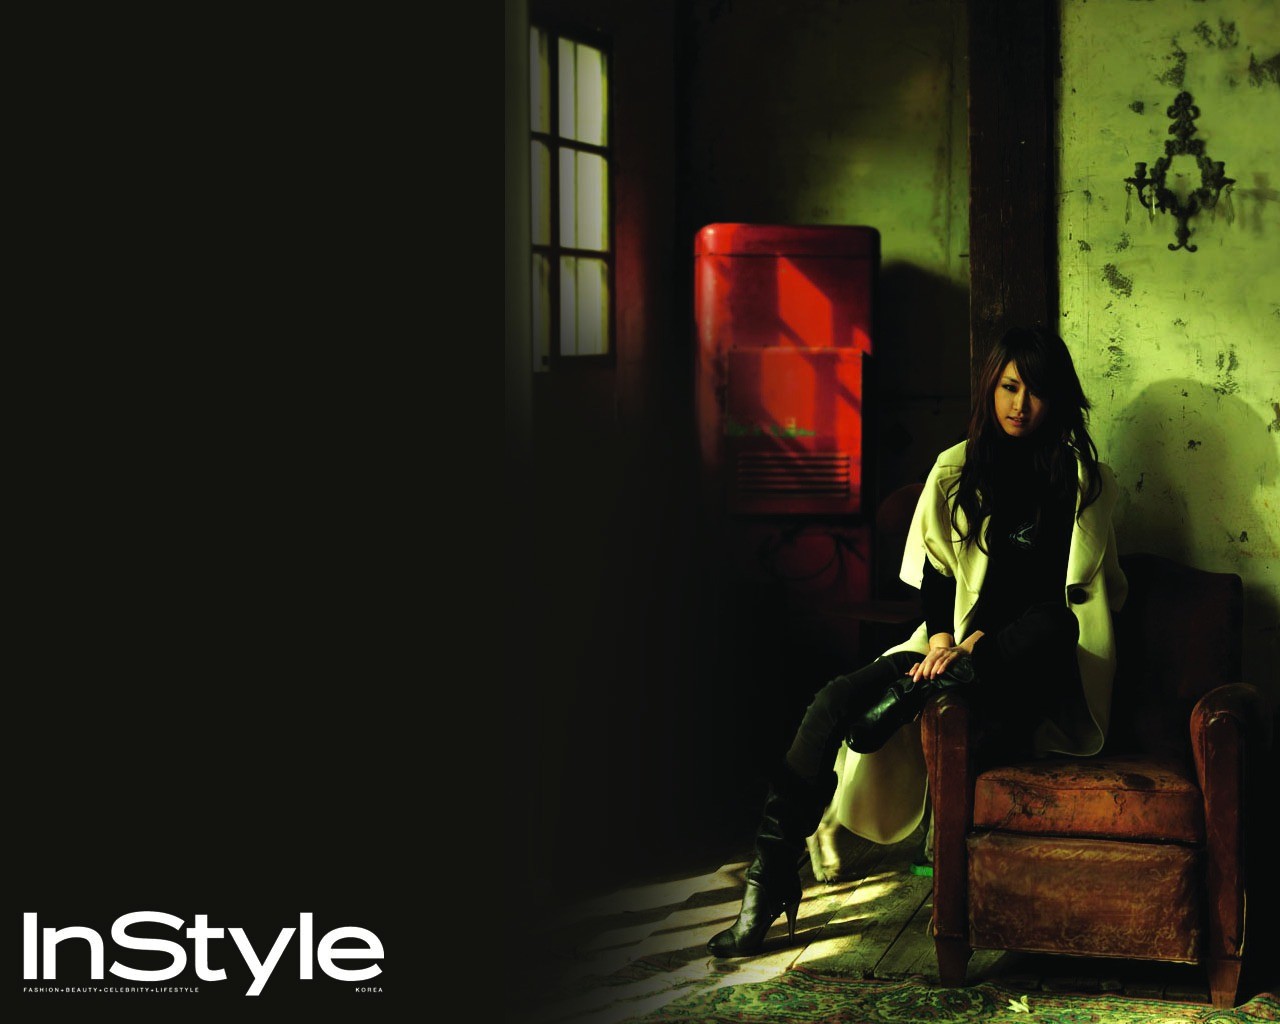 South Korea Instyle Cover Model #37 - 1280x1024